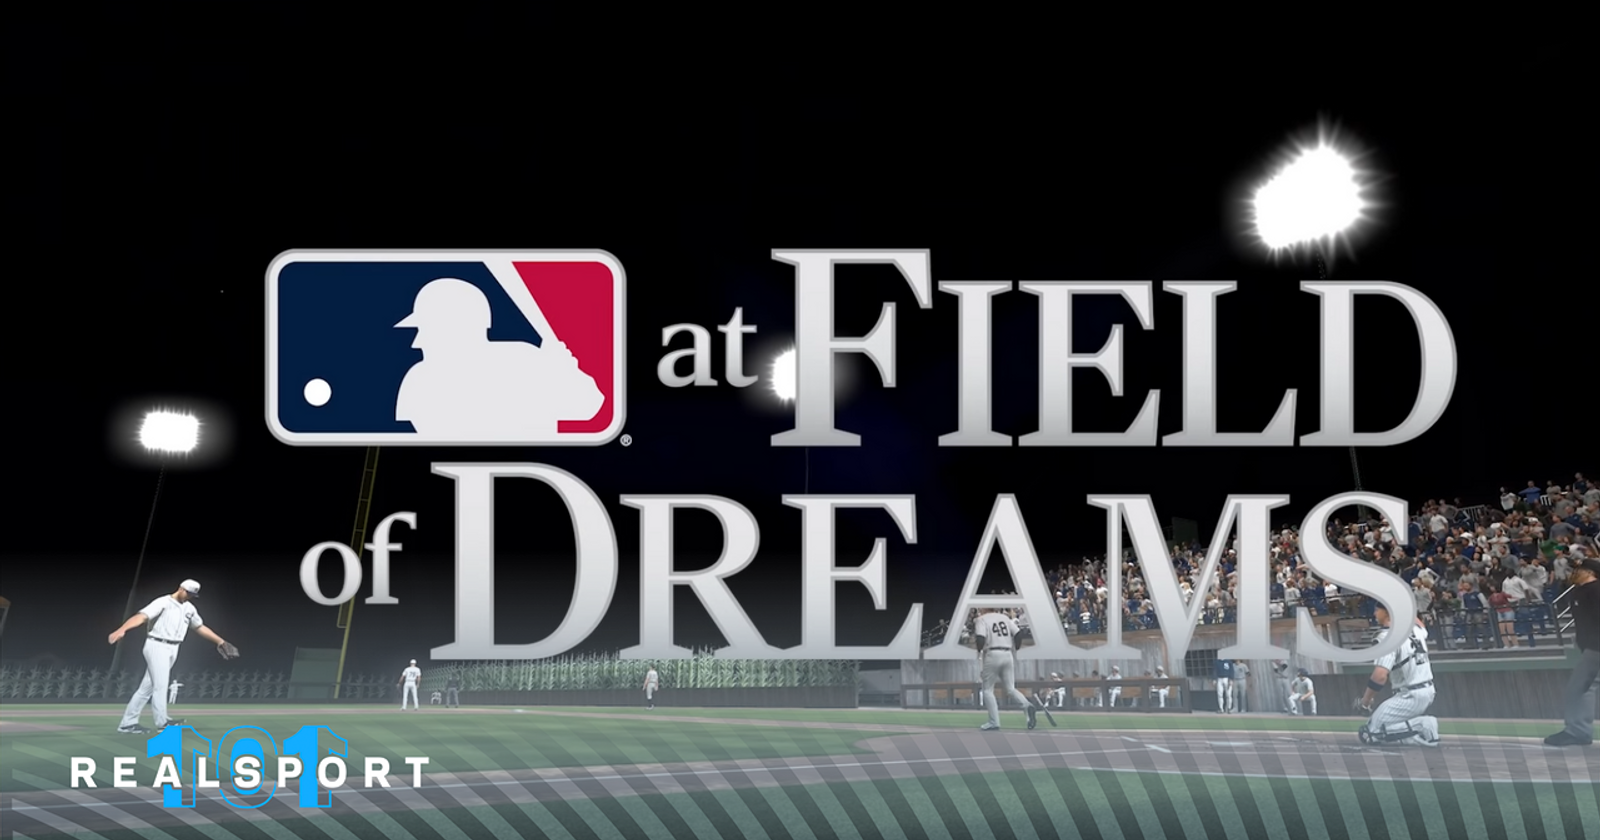 MLB announces 2022 Field of Dreams Game